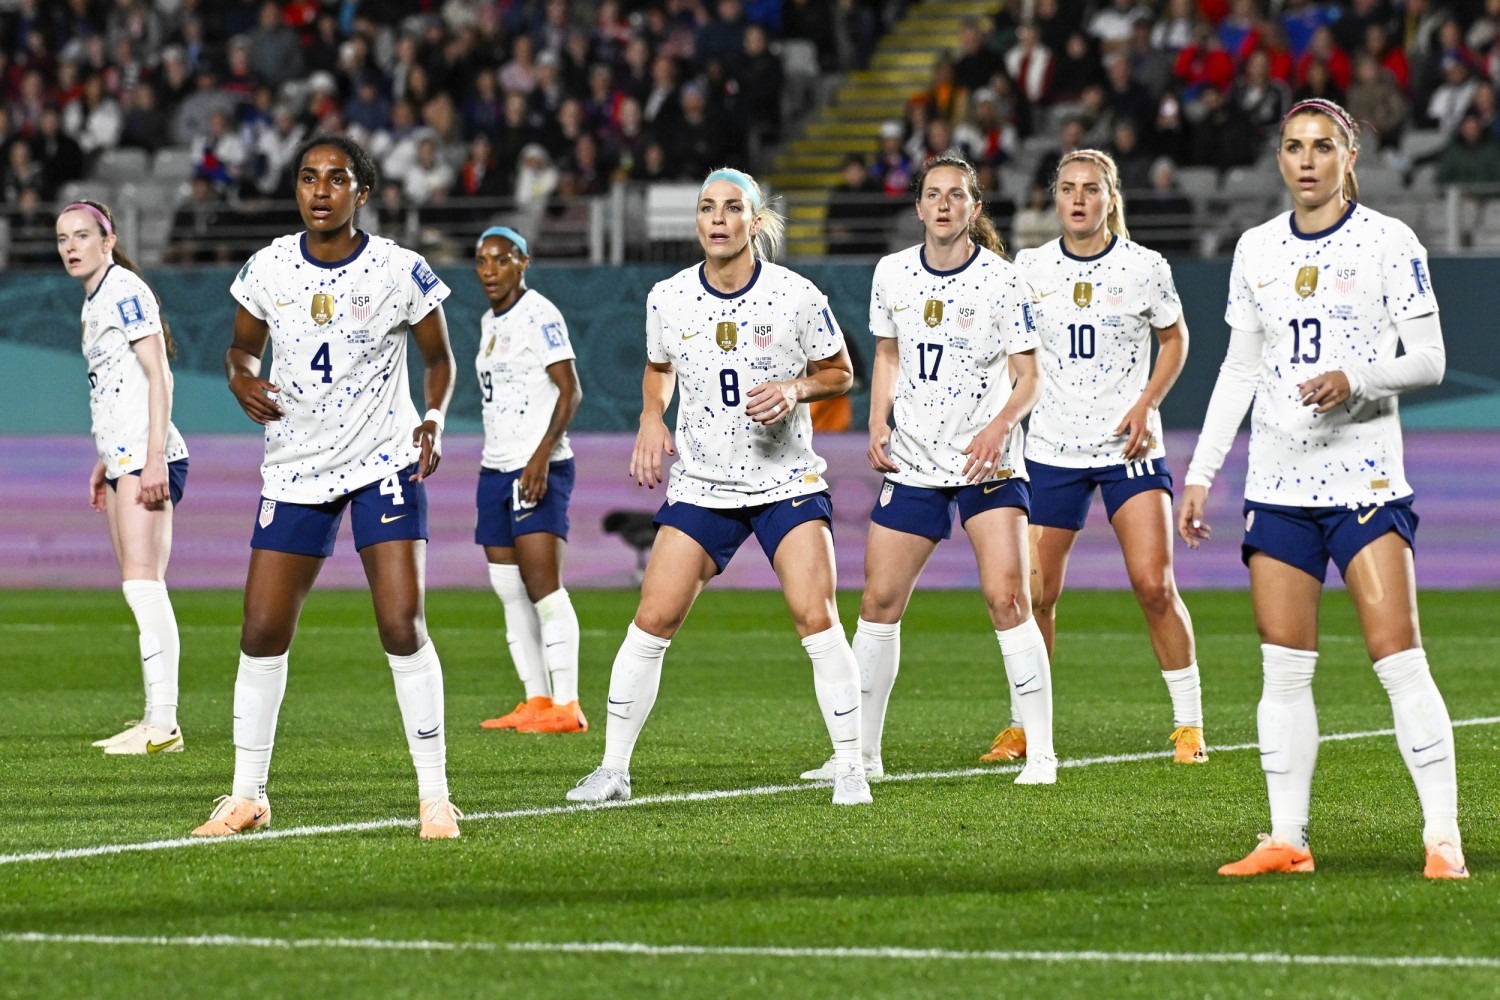 After 3 lackluster matches, knockout play begins for U.S